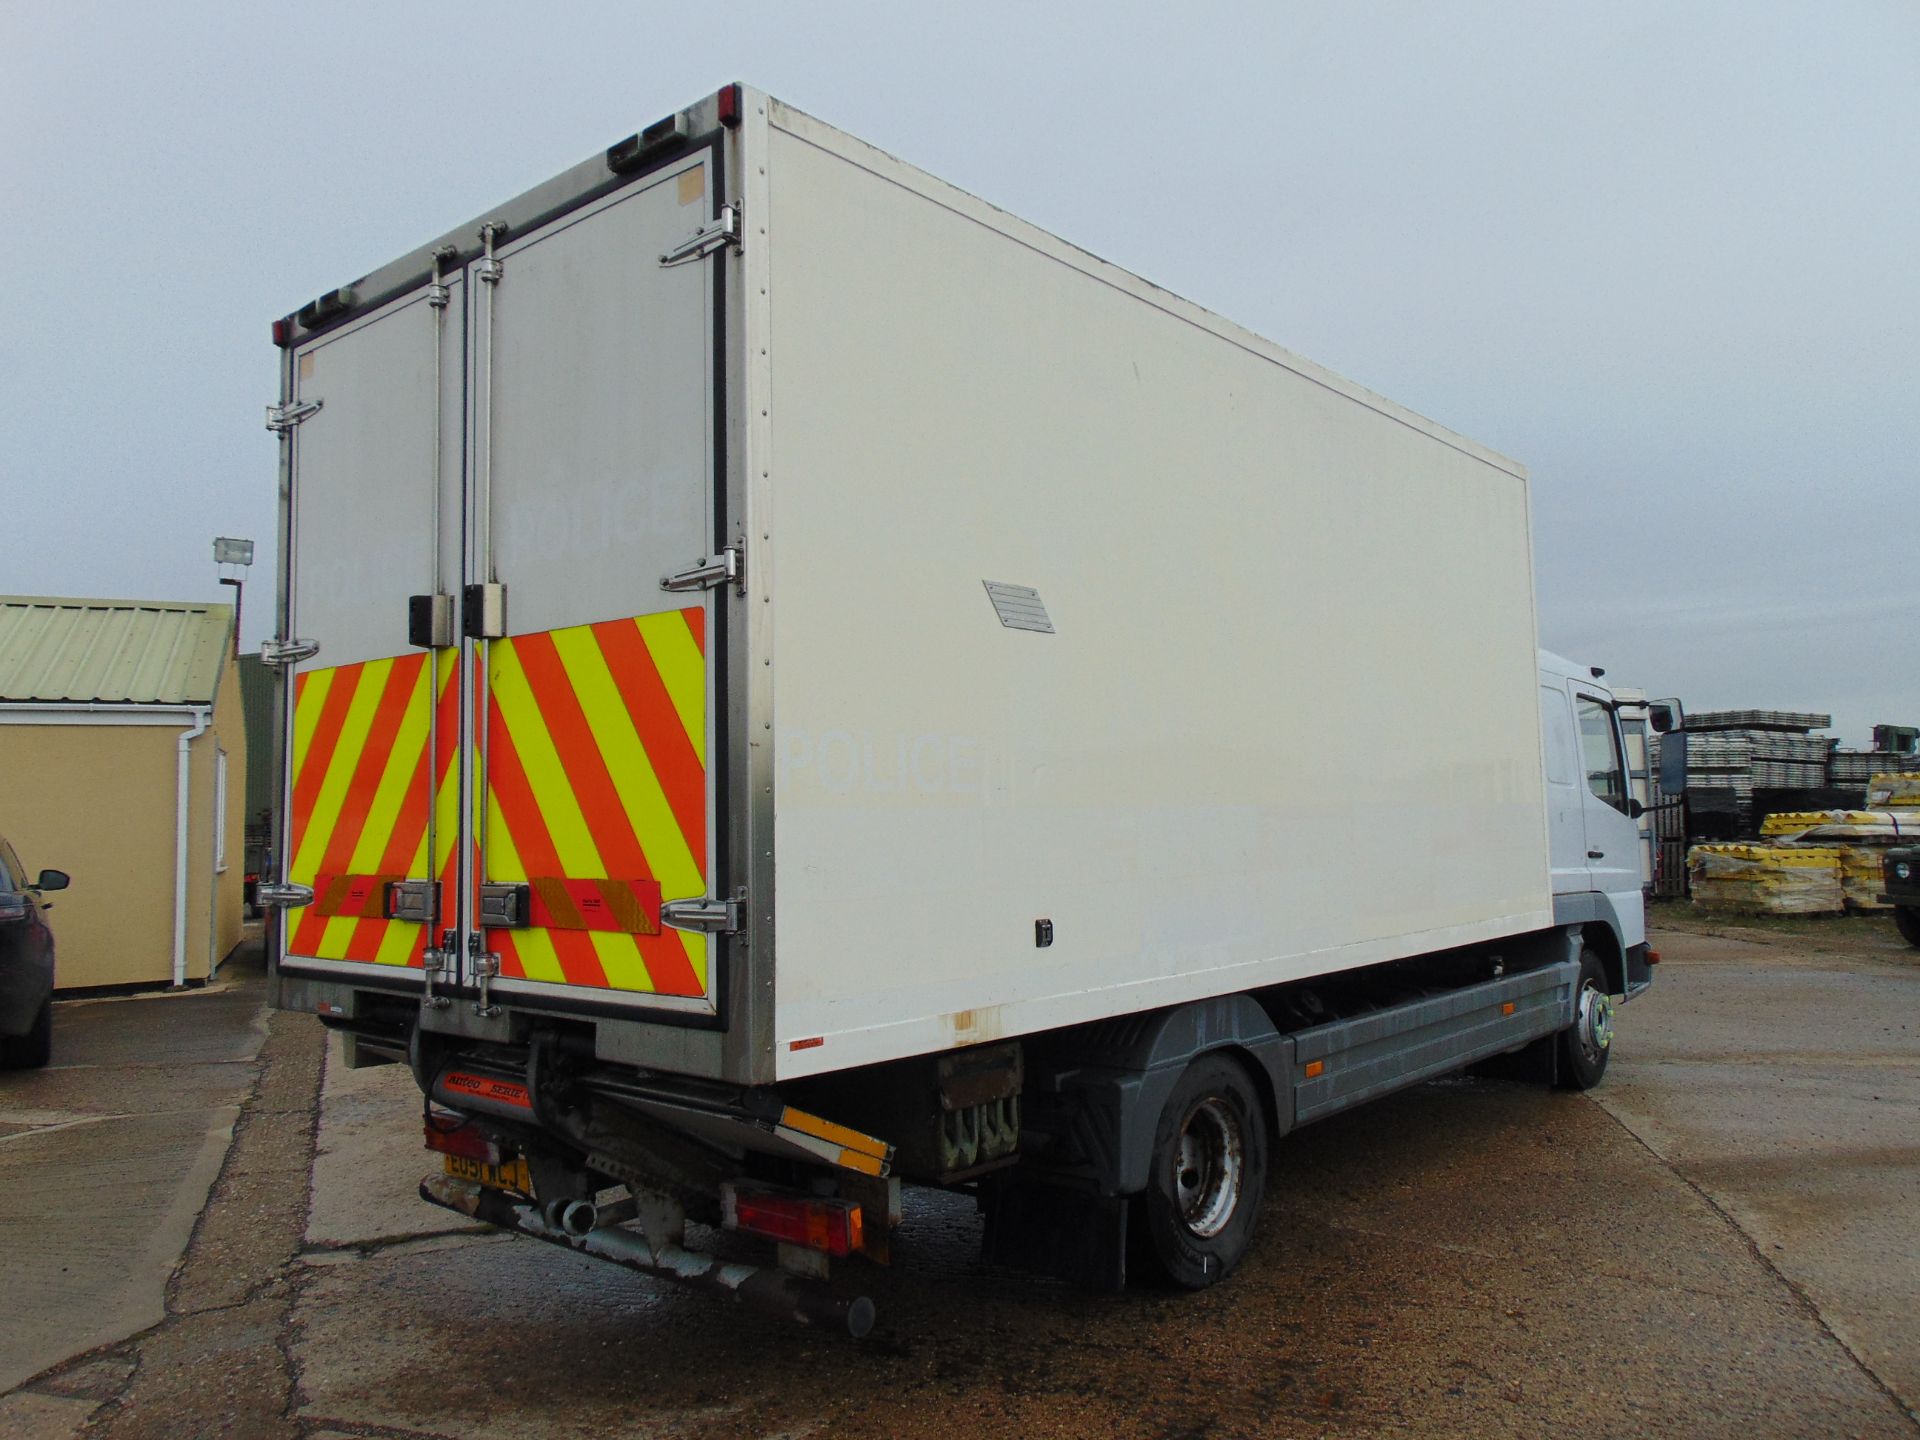 2001 Mercedes Benz Atego 1018 Box Truck C/W Tail Lift - Image 6 of 21